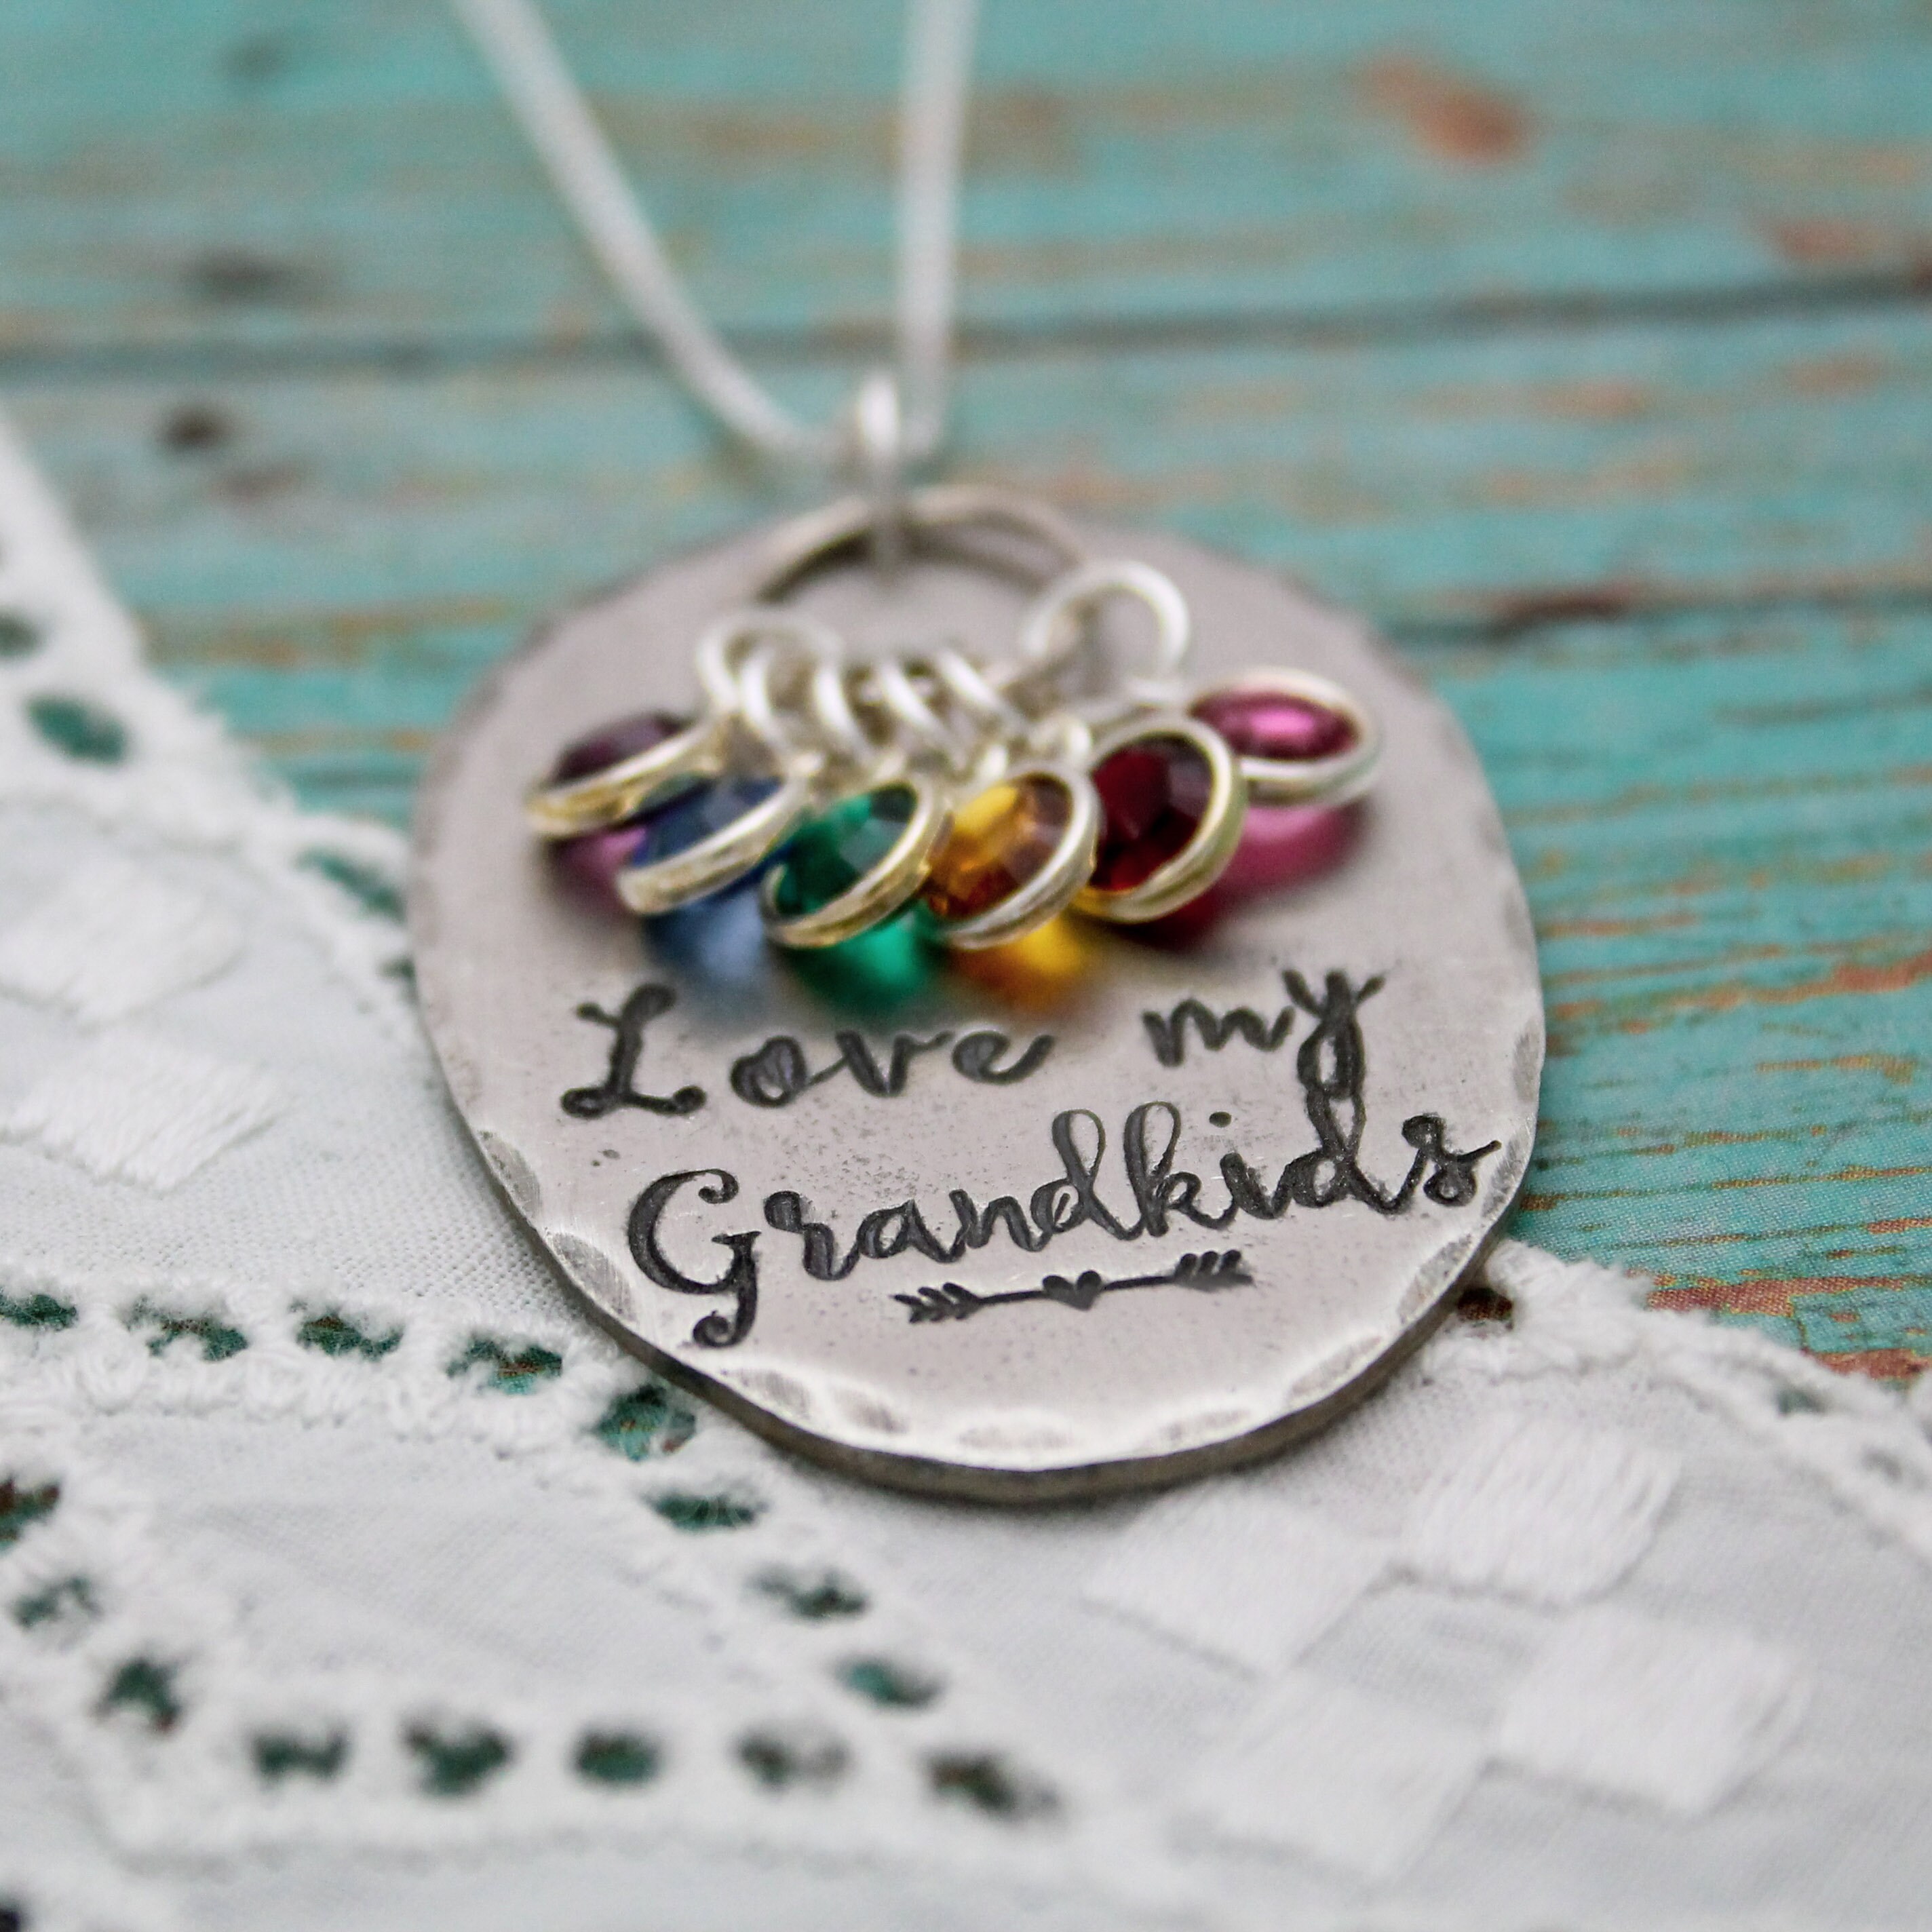 Jewelry Gifts For Grandma - The Vintage Pearl